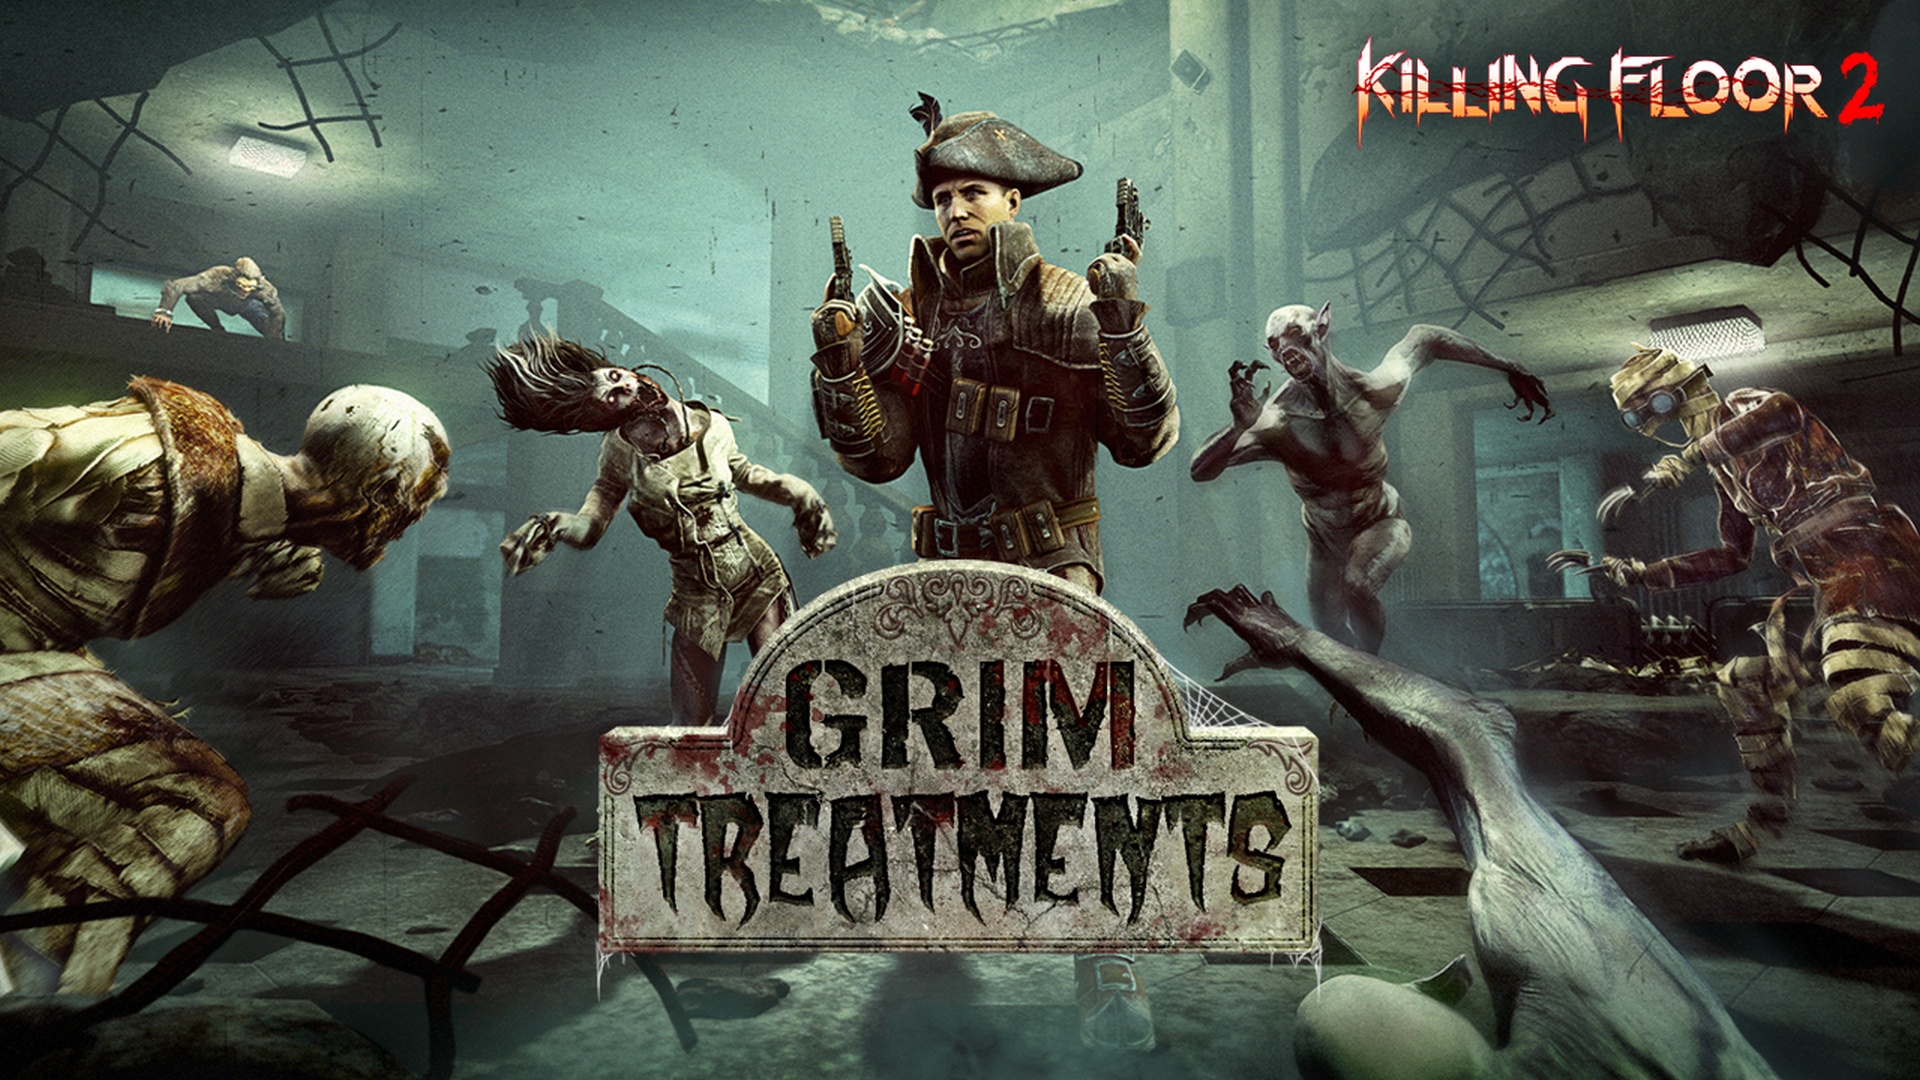 New Tricks And Treats In The Killing Floor 2 Grim Treatments Images, Photos, Reviews